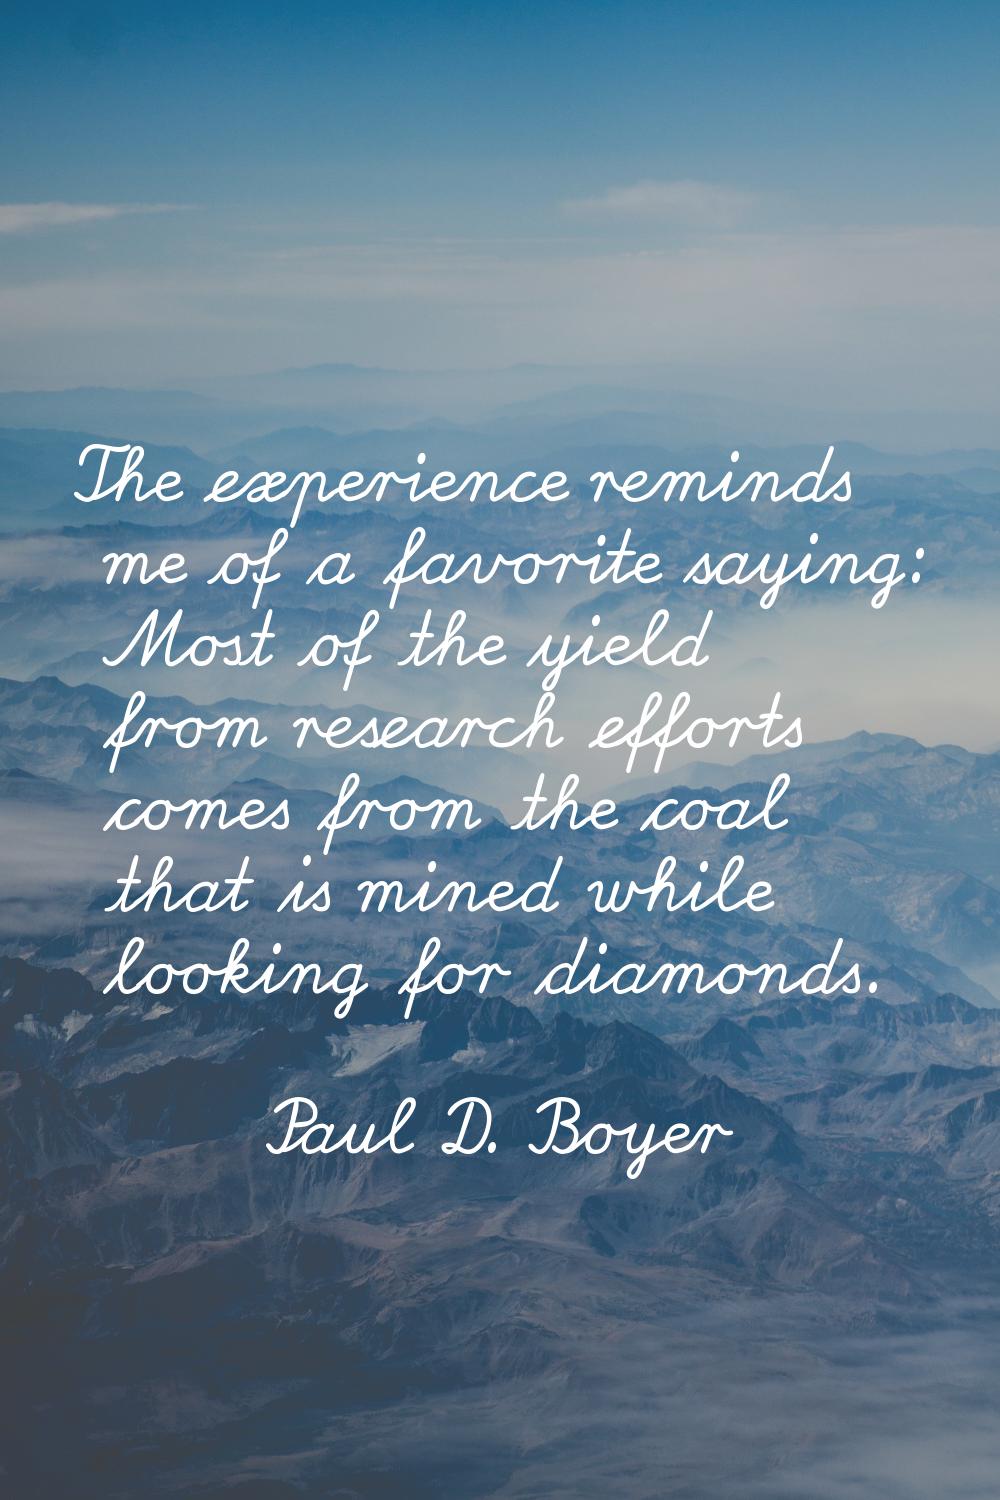 The experience reminds me of a favorite saying: Most of the yield from research efforts comes from 